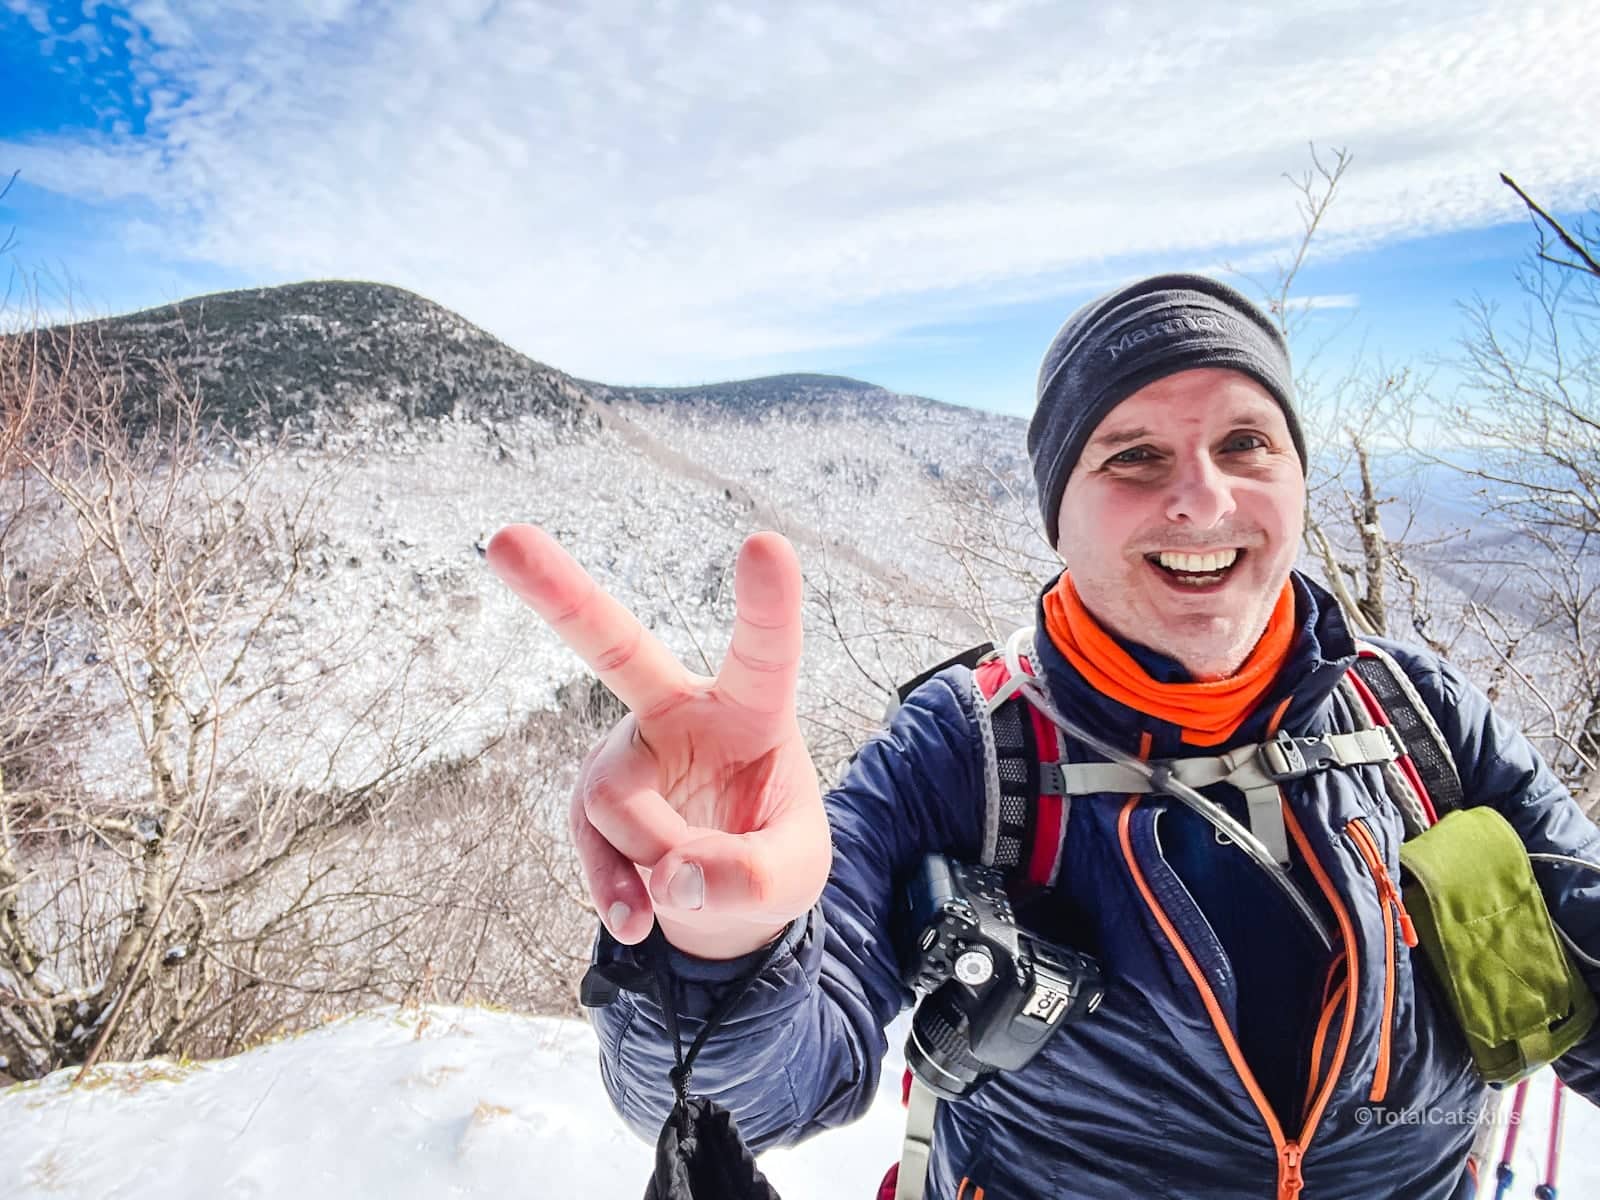 Hiker showing two fingers on a snowy mountain